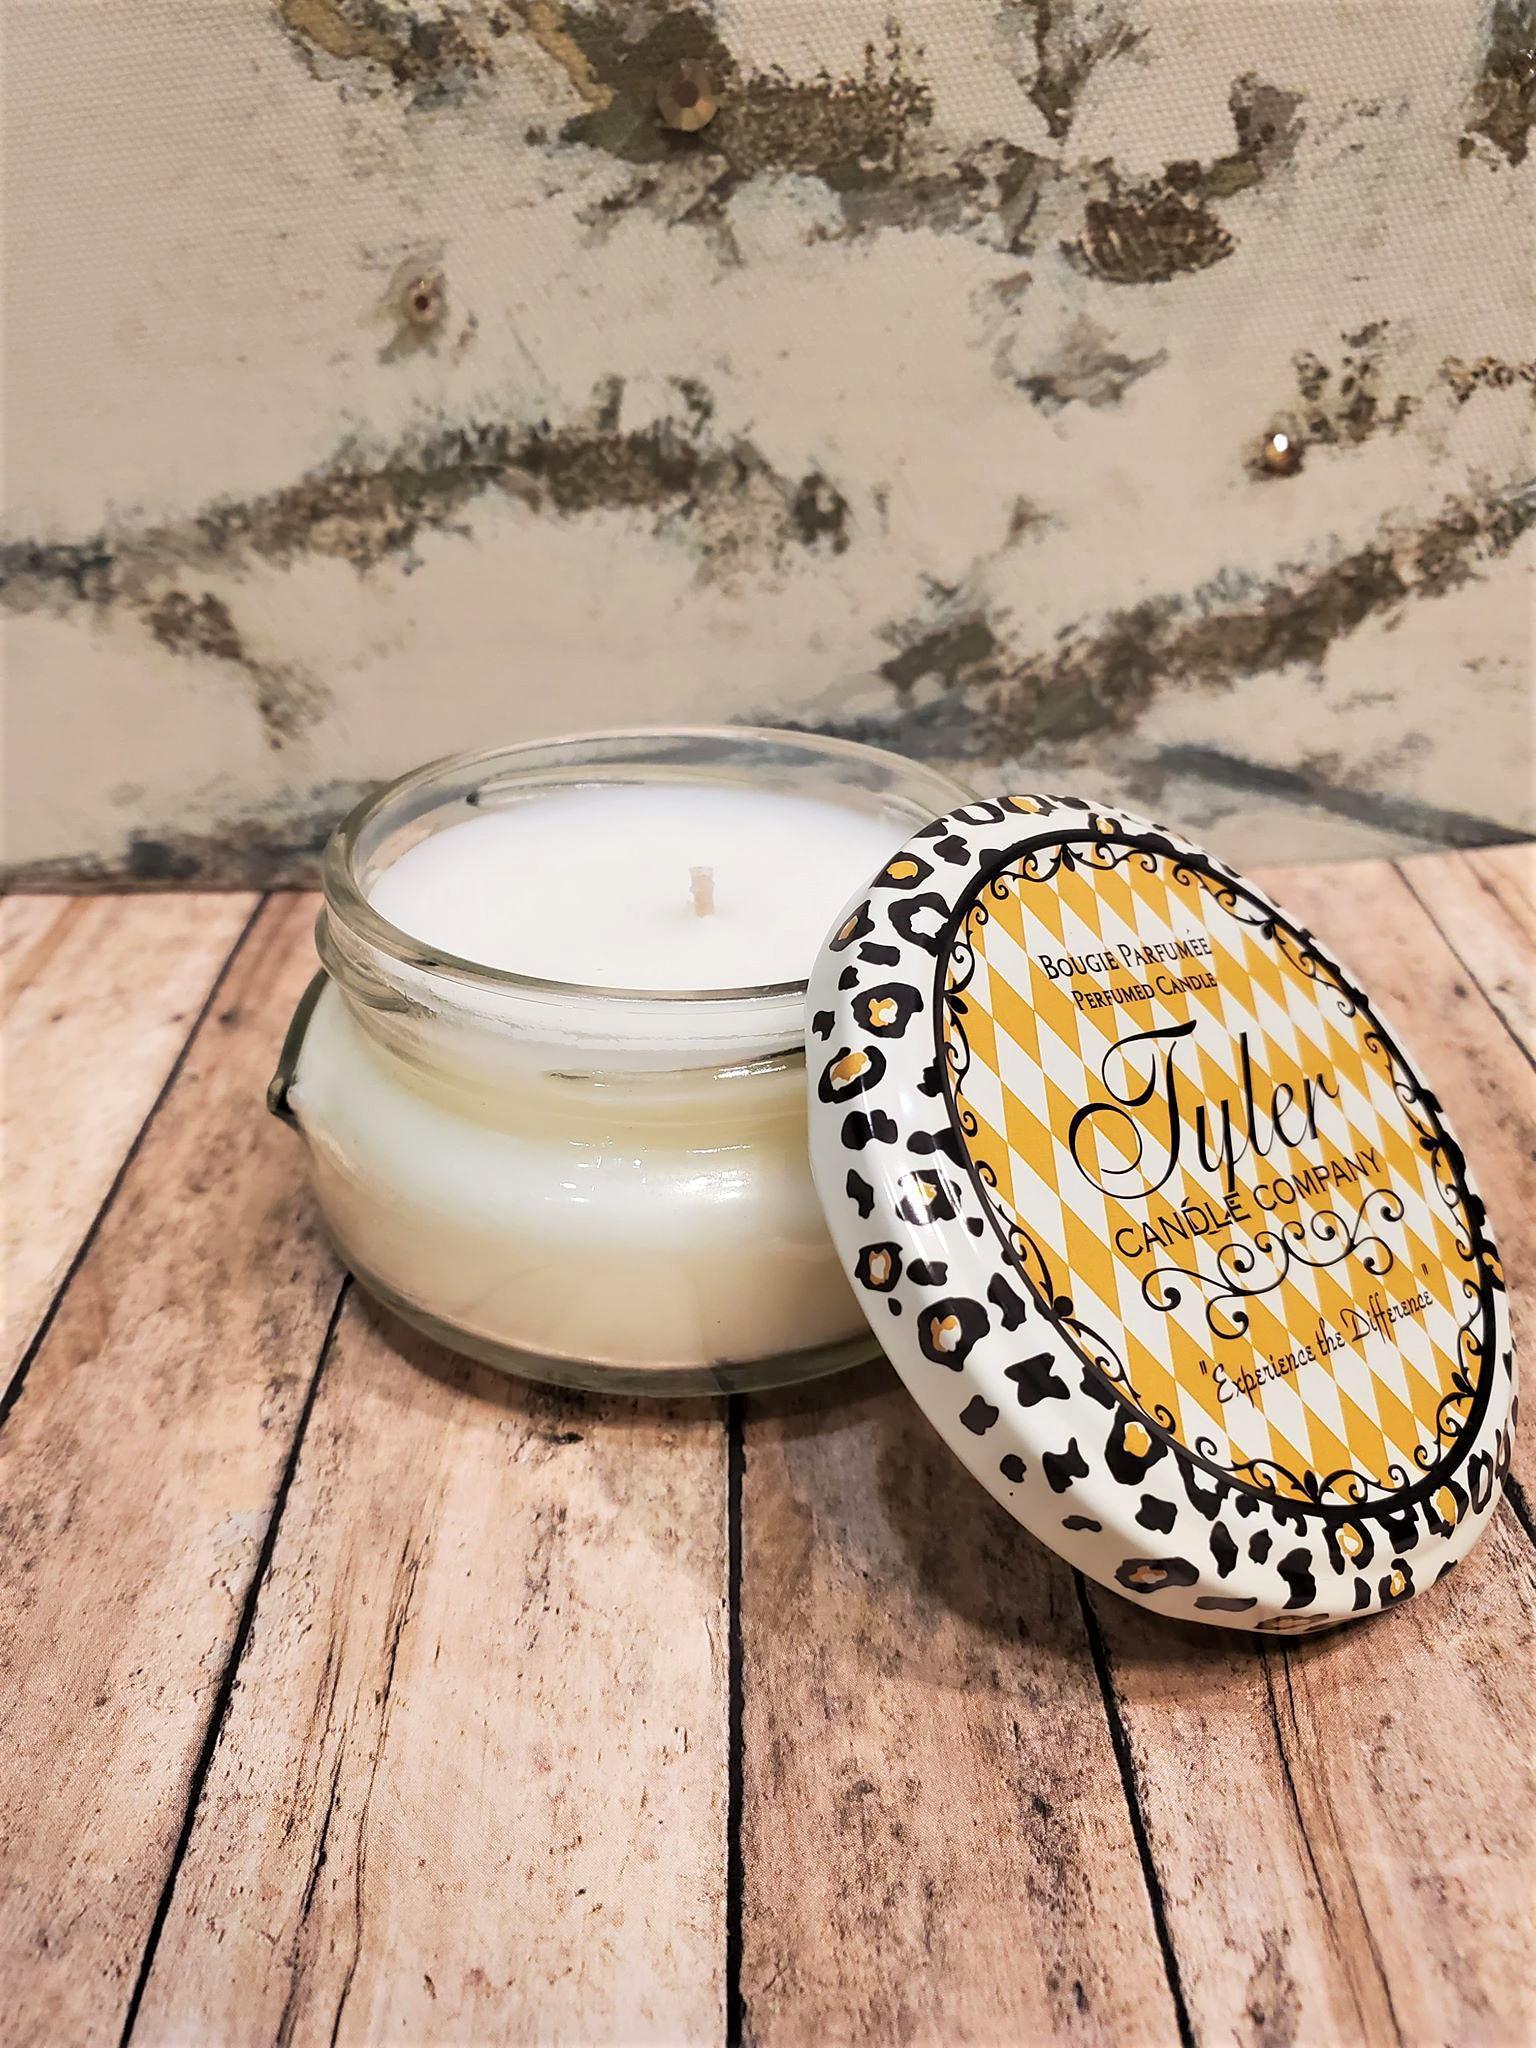 Dolce Vita Tyler Candle